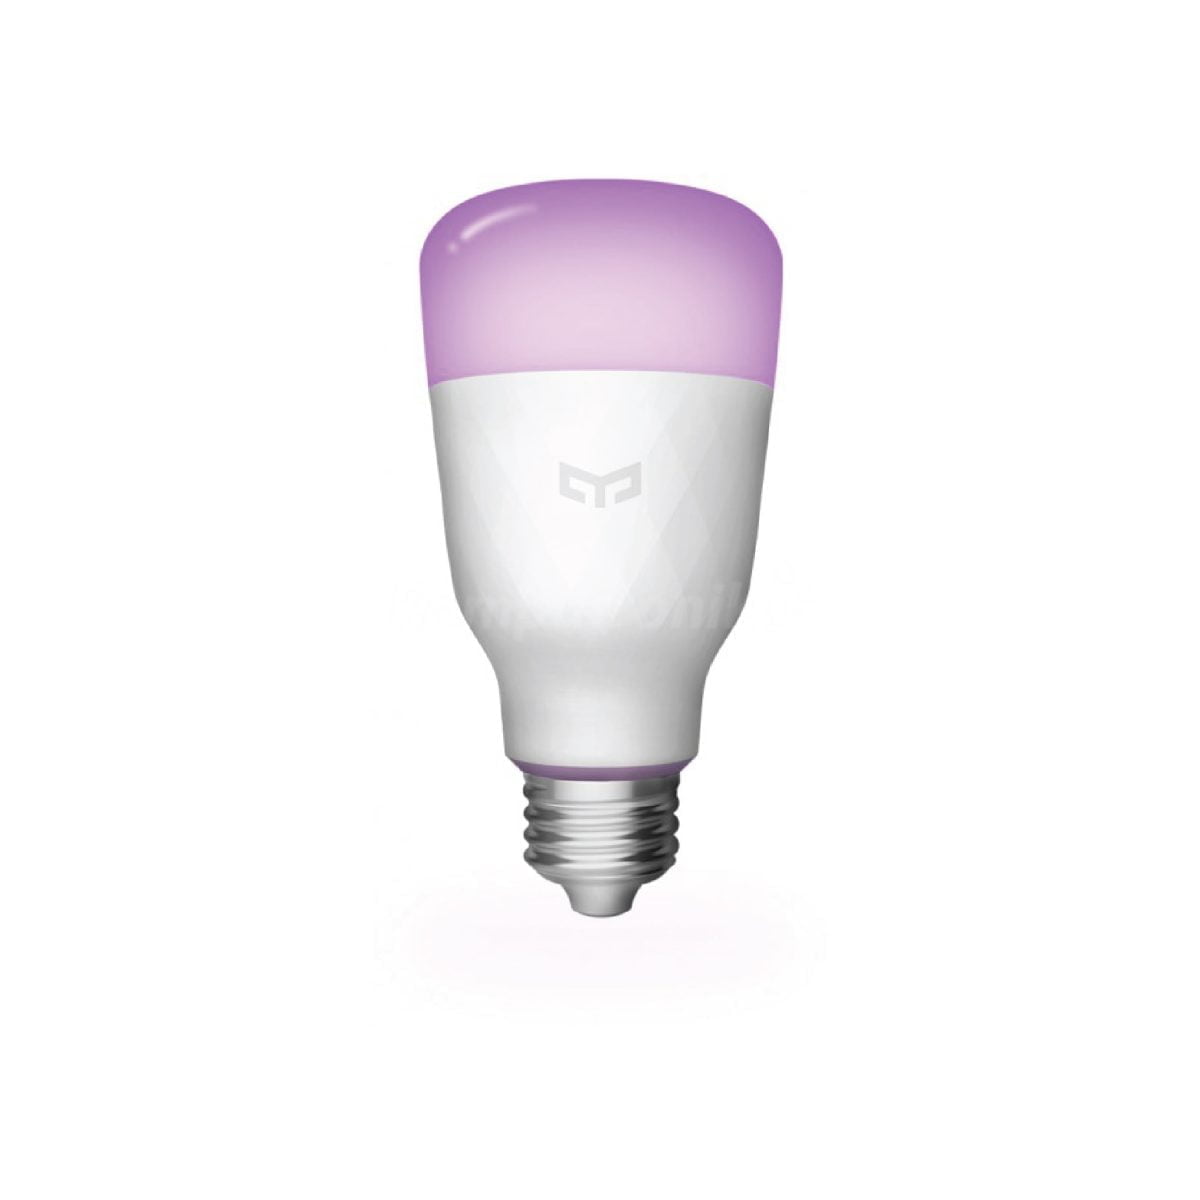 Bulb 23 Xiaomi The Yeelight 1S Rgb Smart Light Bulb Will Allow You To Create Your Own Smart Home. You Can Control It With Your Voice Or Application And Decide With What Temperature And Power It Should Shine. Luminous Flux: 800Lm Color Temperature: 1700K-6500K Lamp Holder: E27 Rated Power: 8.5W &Nbsp; 16 Million Colors Wifi Enabled, Voice Control, App Control, Music Sync &Lt;Img Class=&Quot;Alignnone Wp-Image-8061 Size-Full&Quot; Src=&Quot;Https://Lablaab.com/Wp-Content/Uploads/2020/04/Bulb-27-2-Scaled.jpg&Quot; Alt=&Quot;&Quot; Width=&Quot;2560&Quot; Height=&Quot;357&Quot; /&Gt; &Nbsp; Yeelight Smart Bulb 1S (Color)